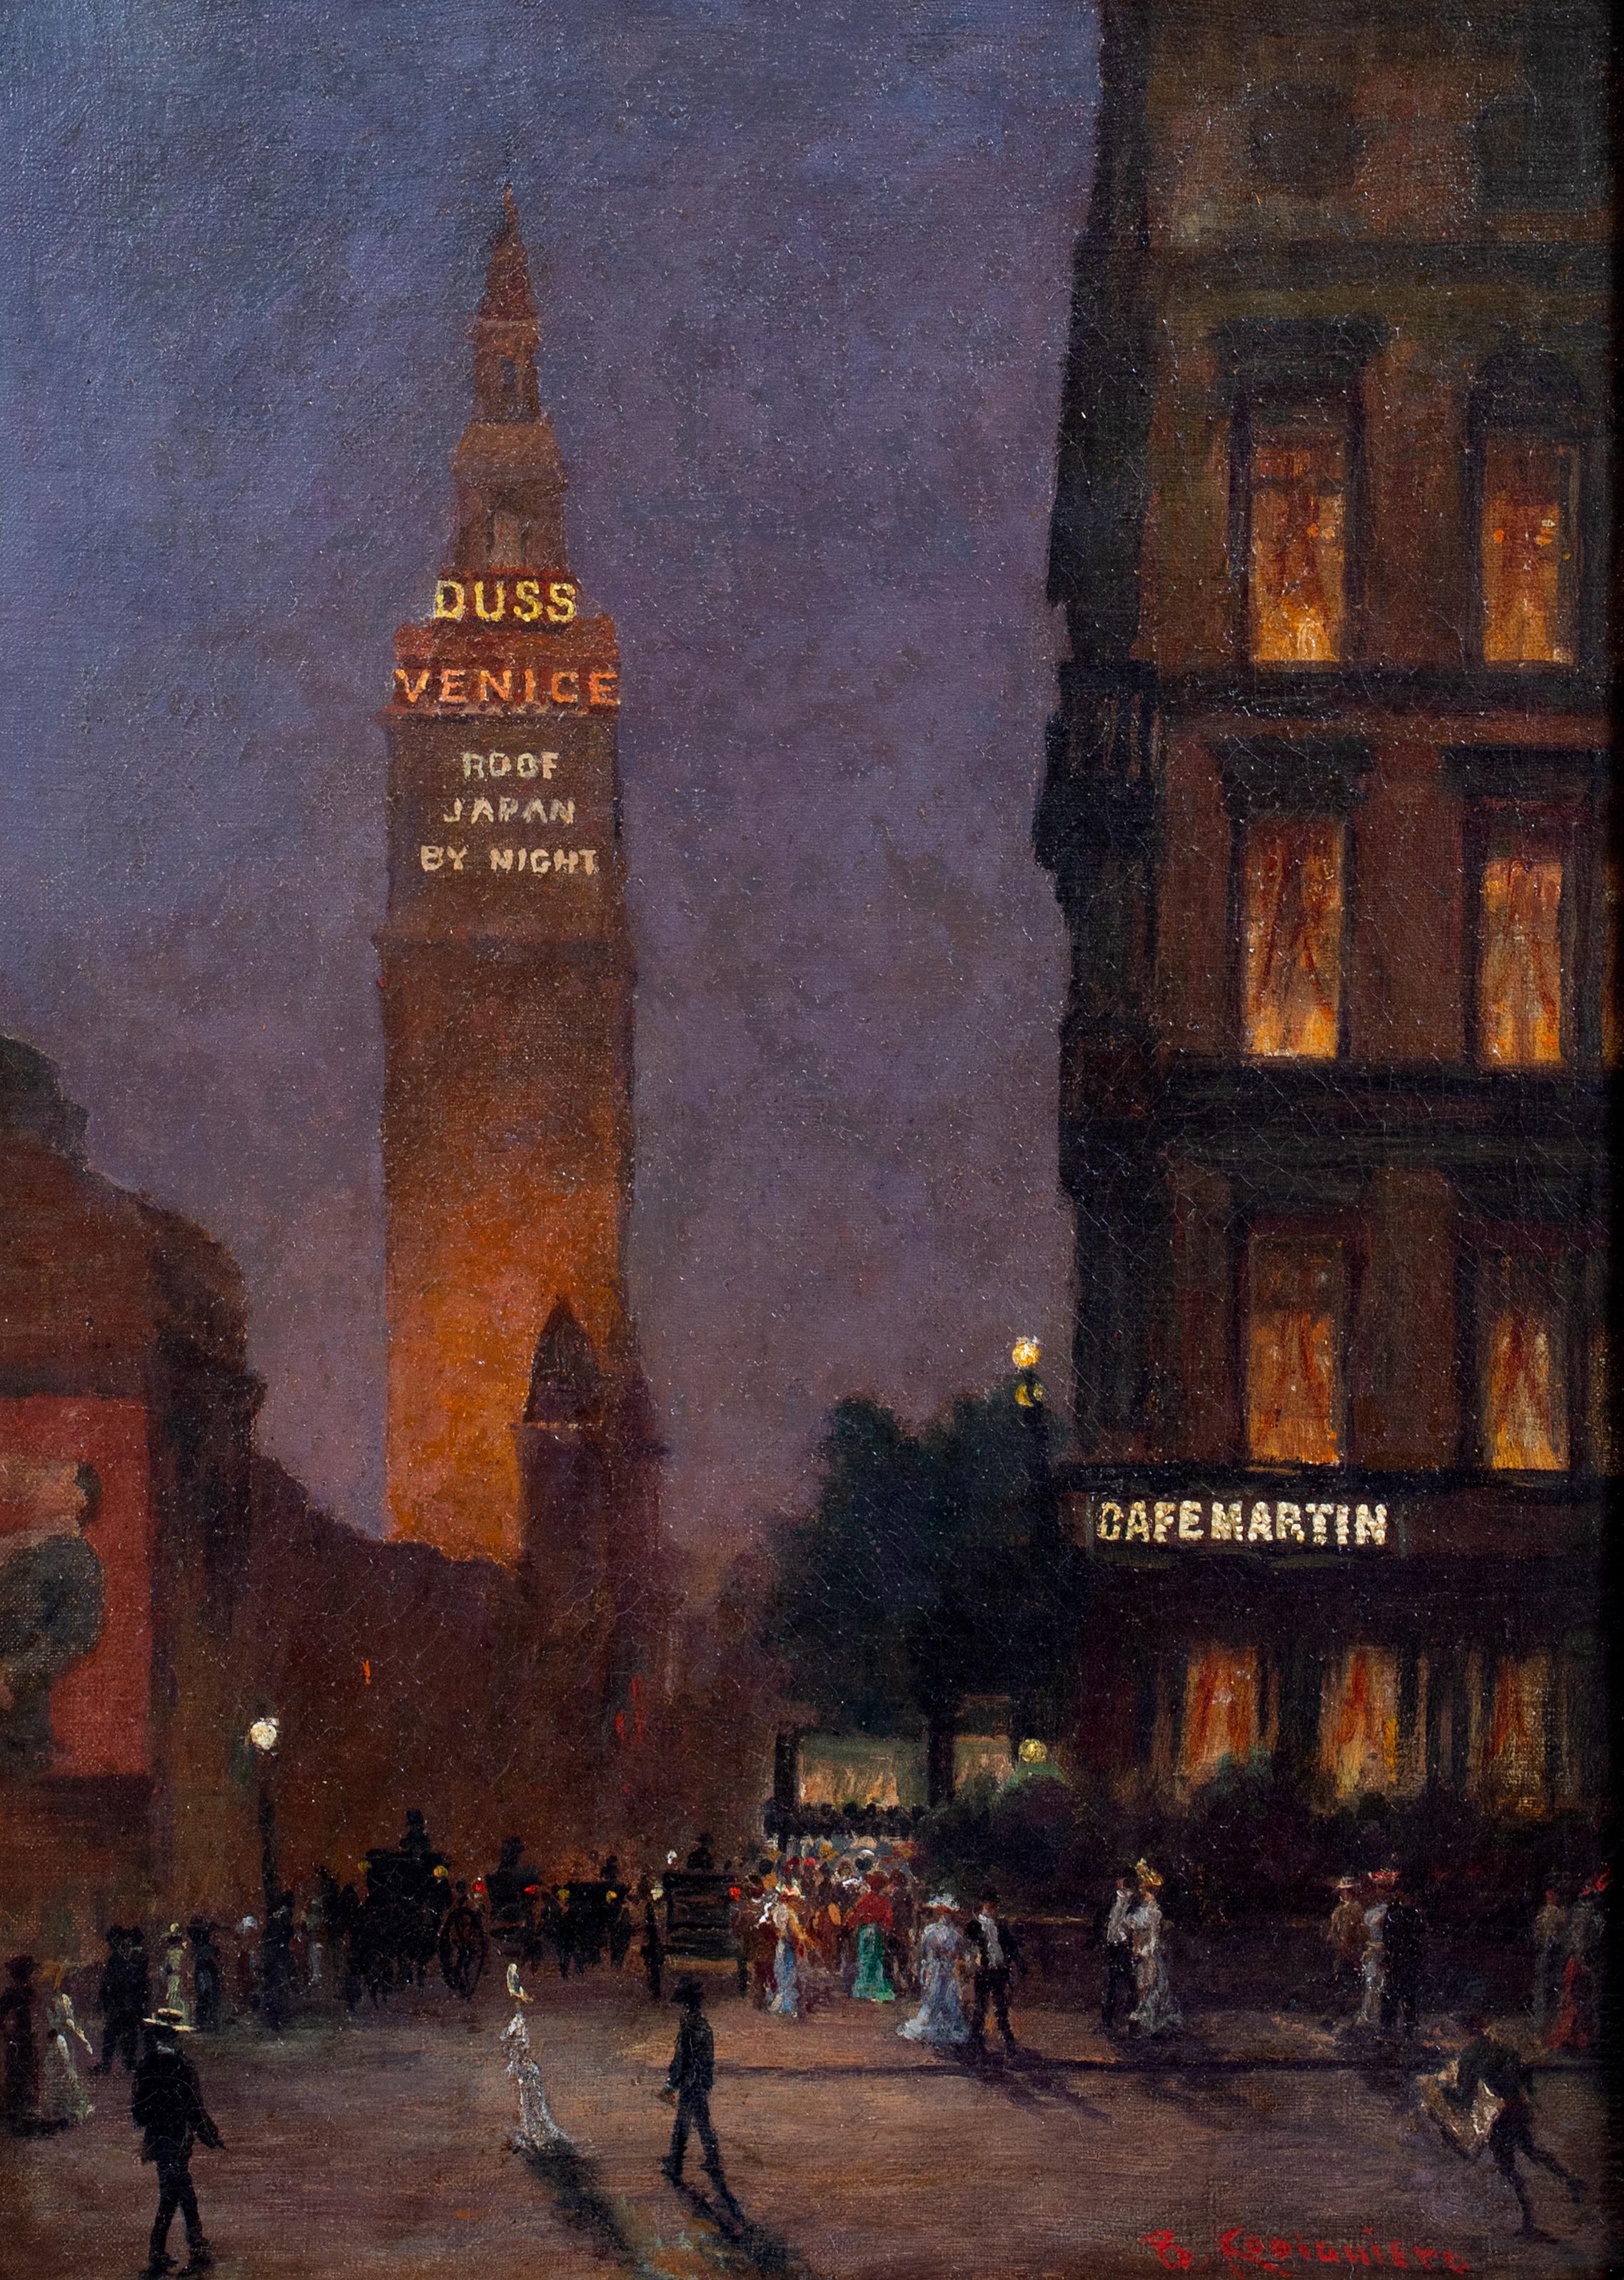 Cafe Martin At Night, Madison Square Park, New York, dated 1902

signed 